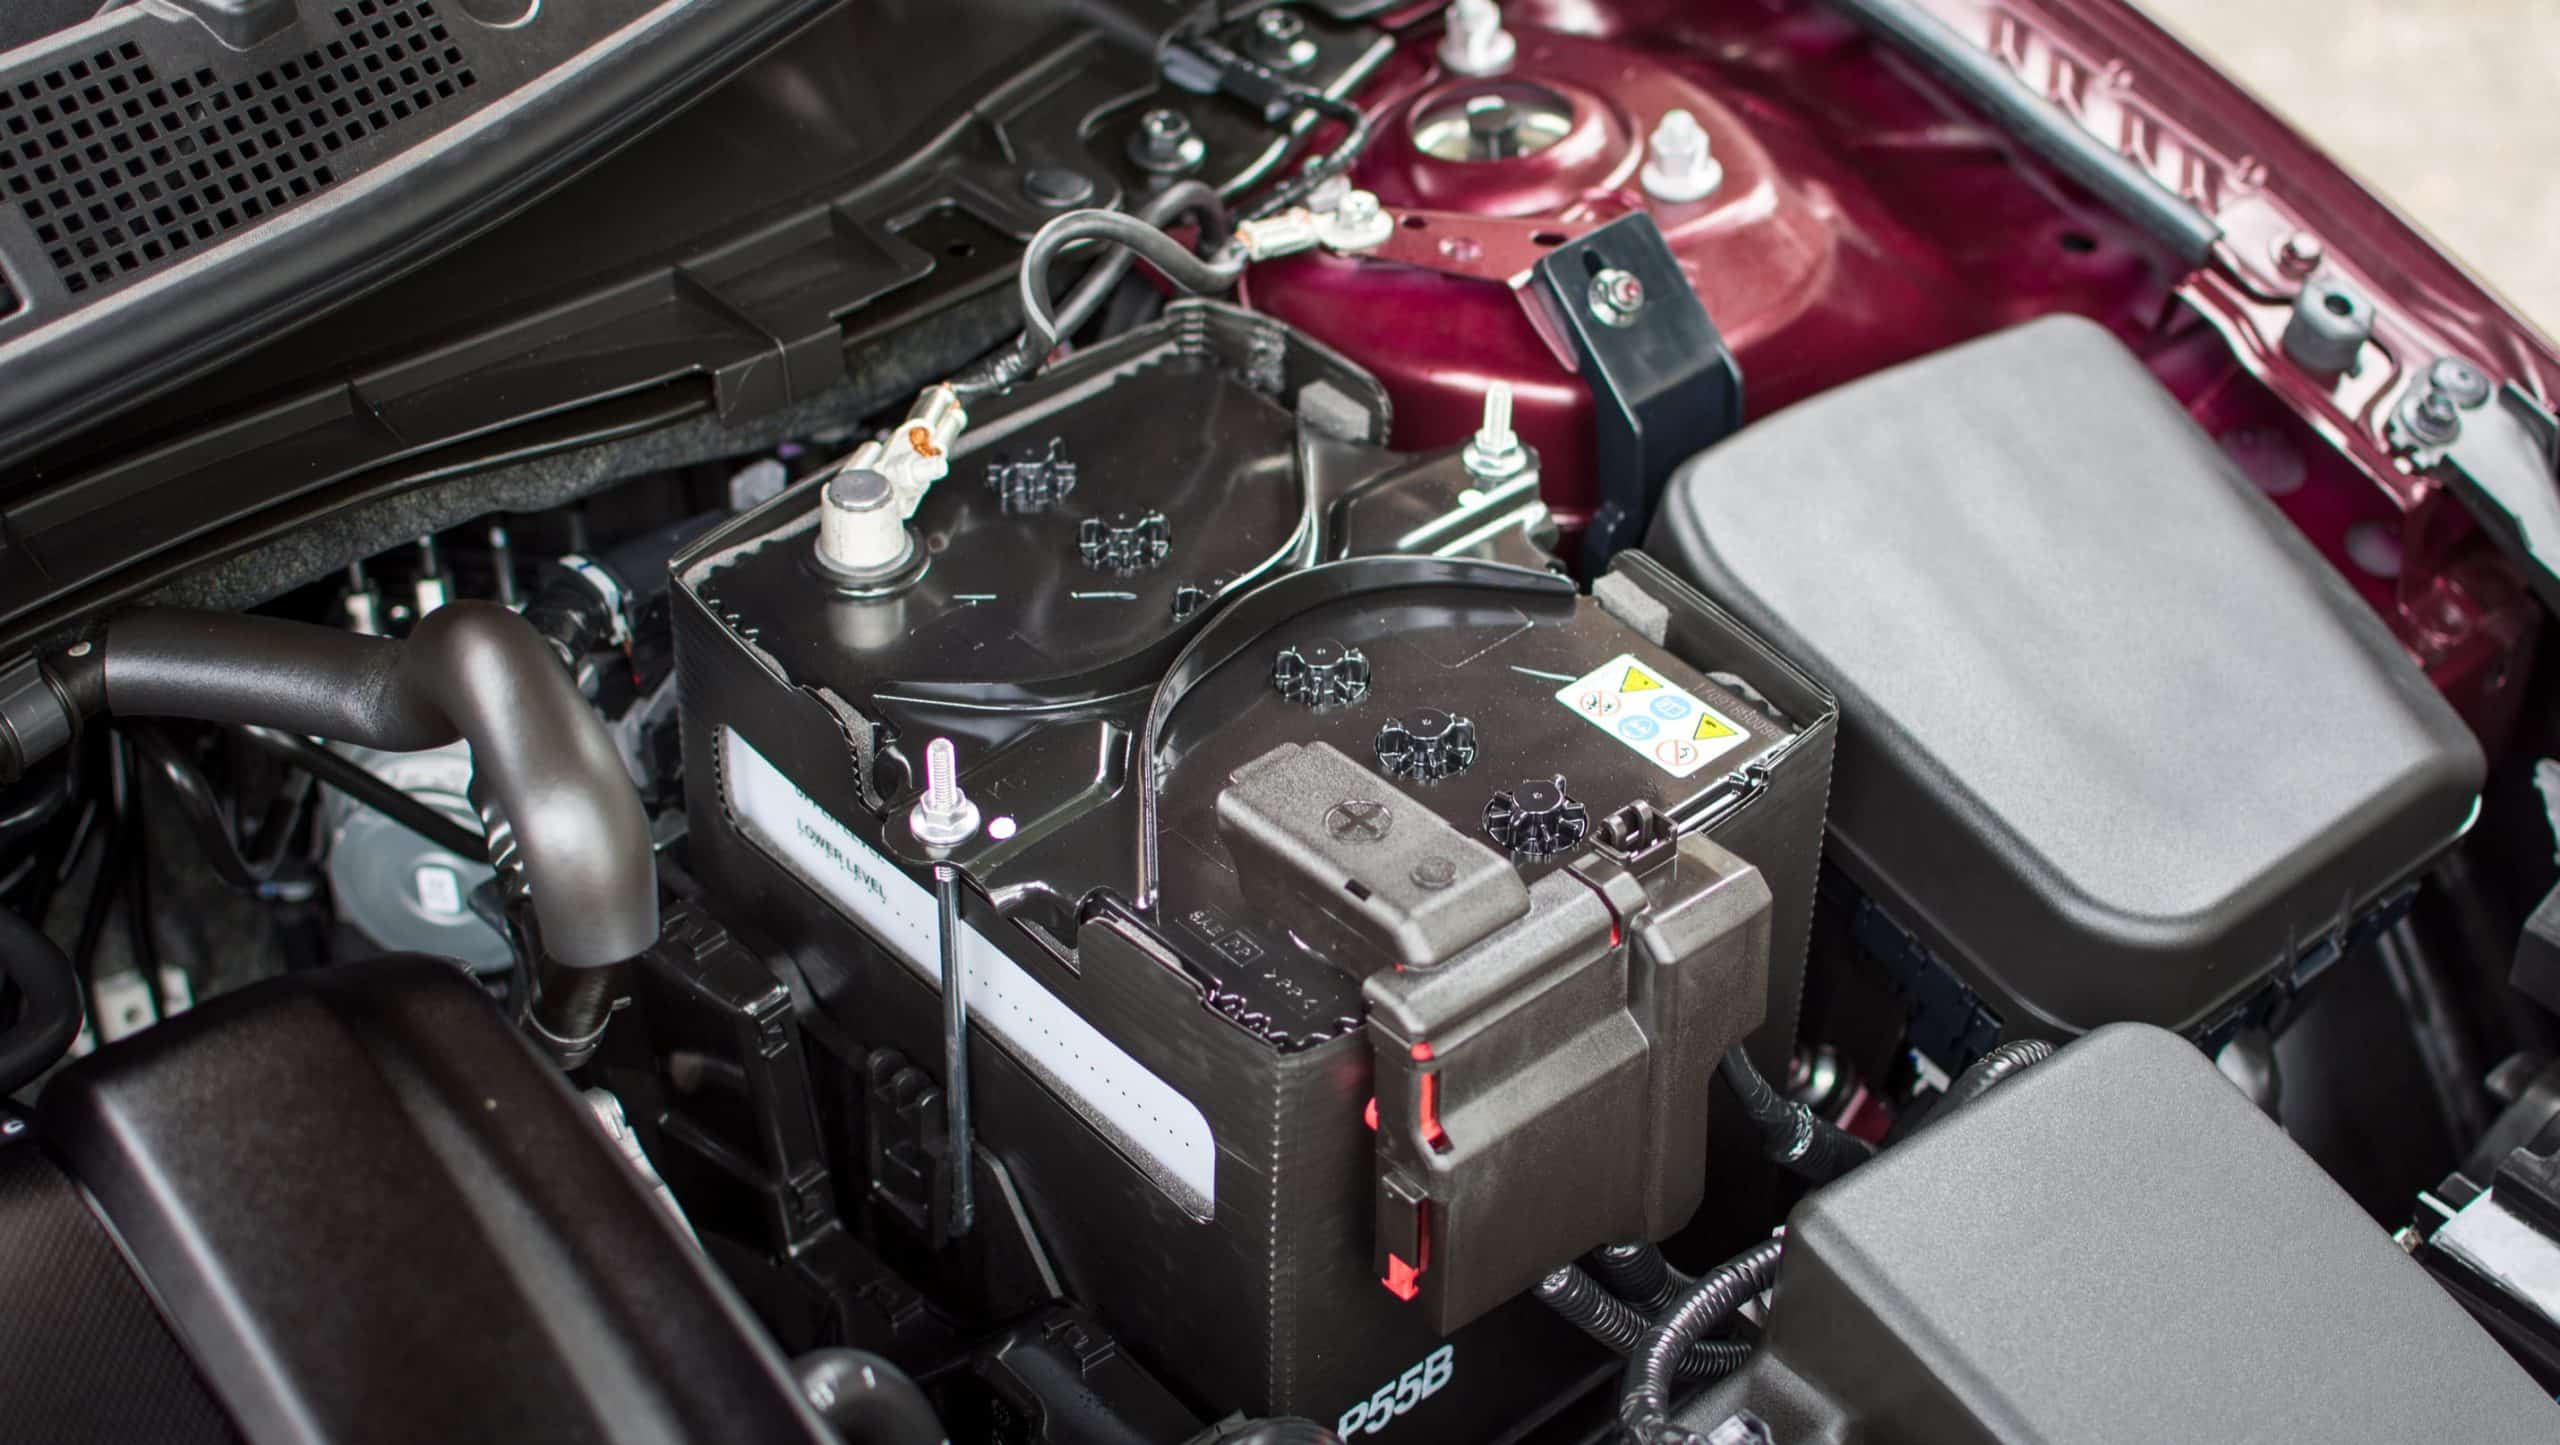 How Long Does it Take to Charge a Car Battery?